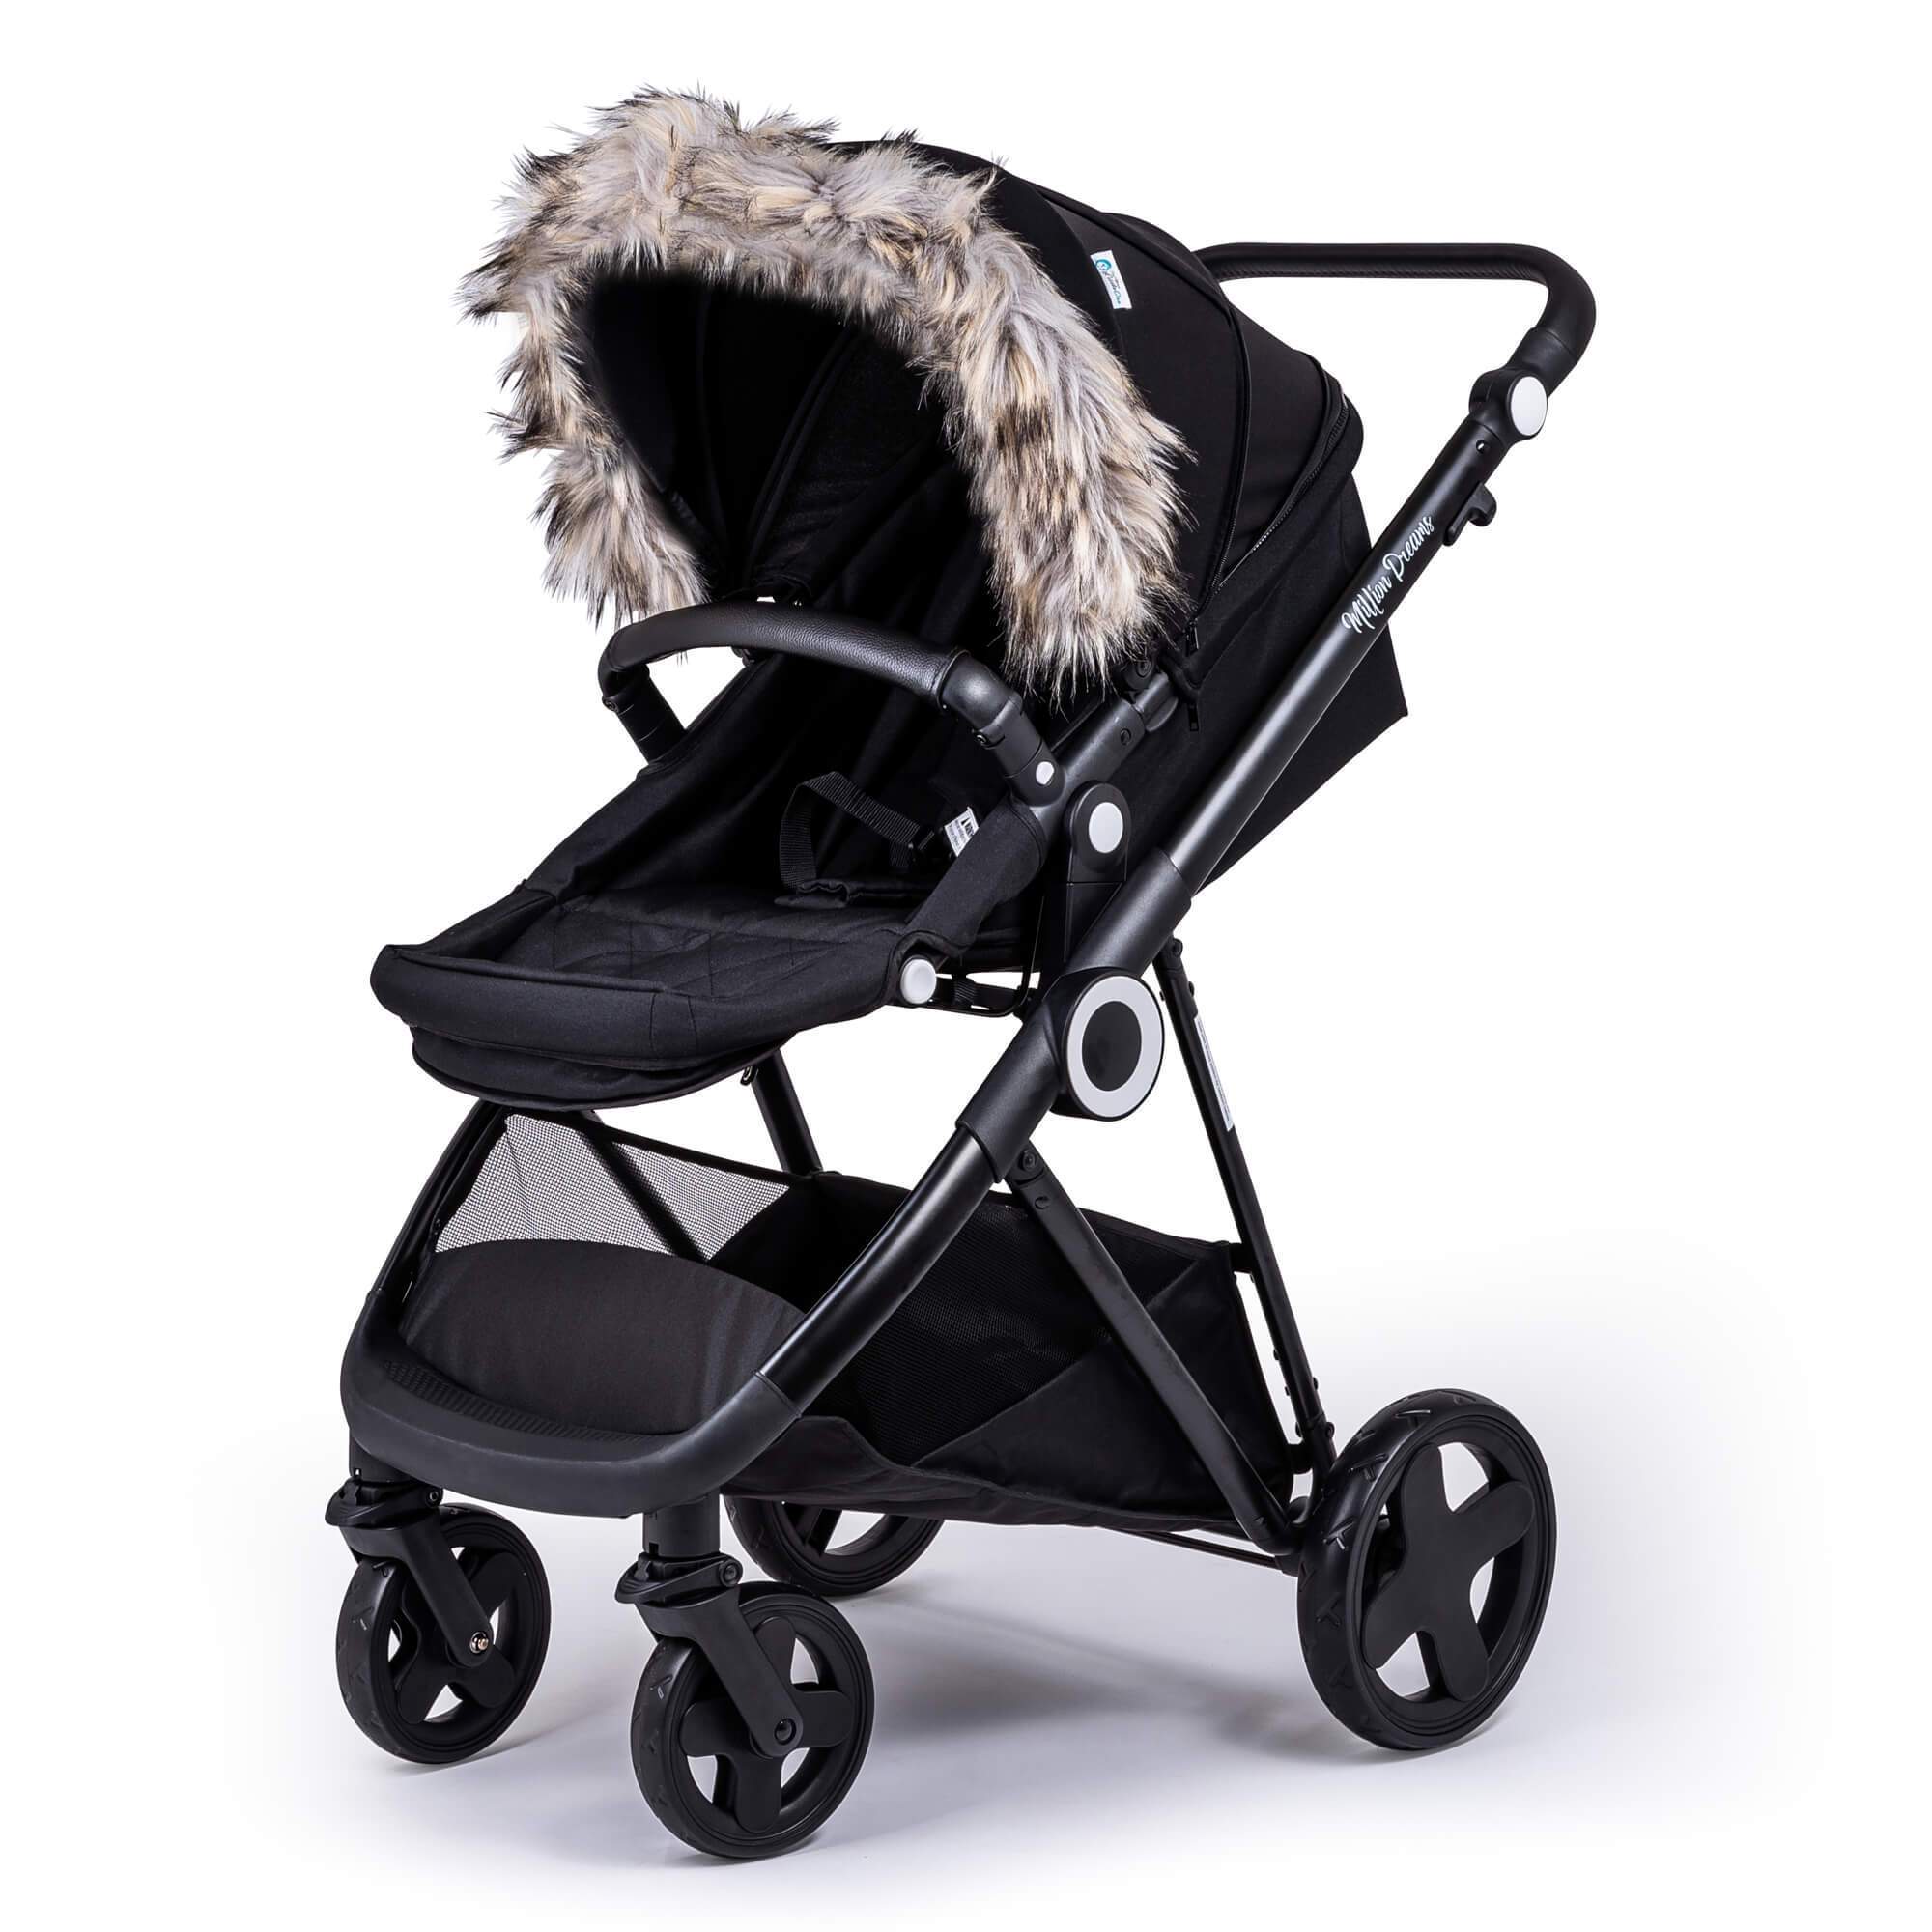 Pram Fur Hood Trim Attachment for Pushchair Compatible with BOB - Light Grey / Fits All Models | For Your Little One